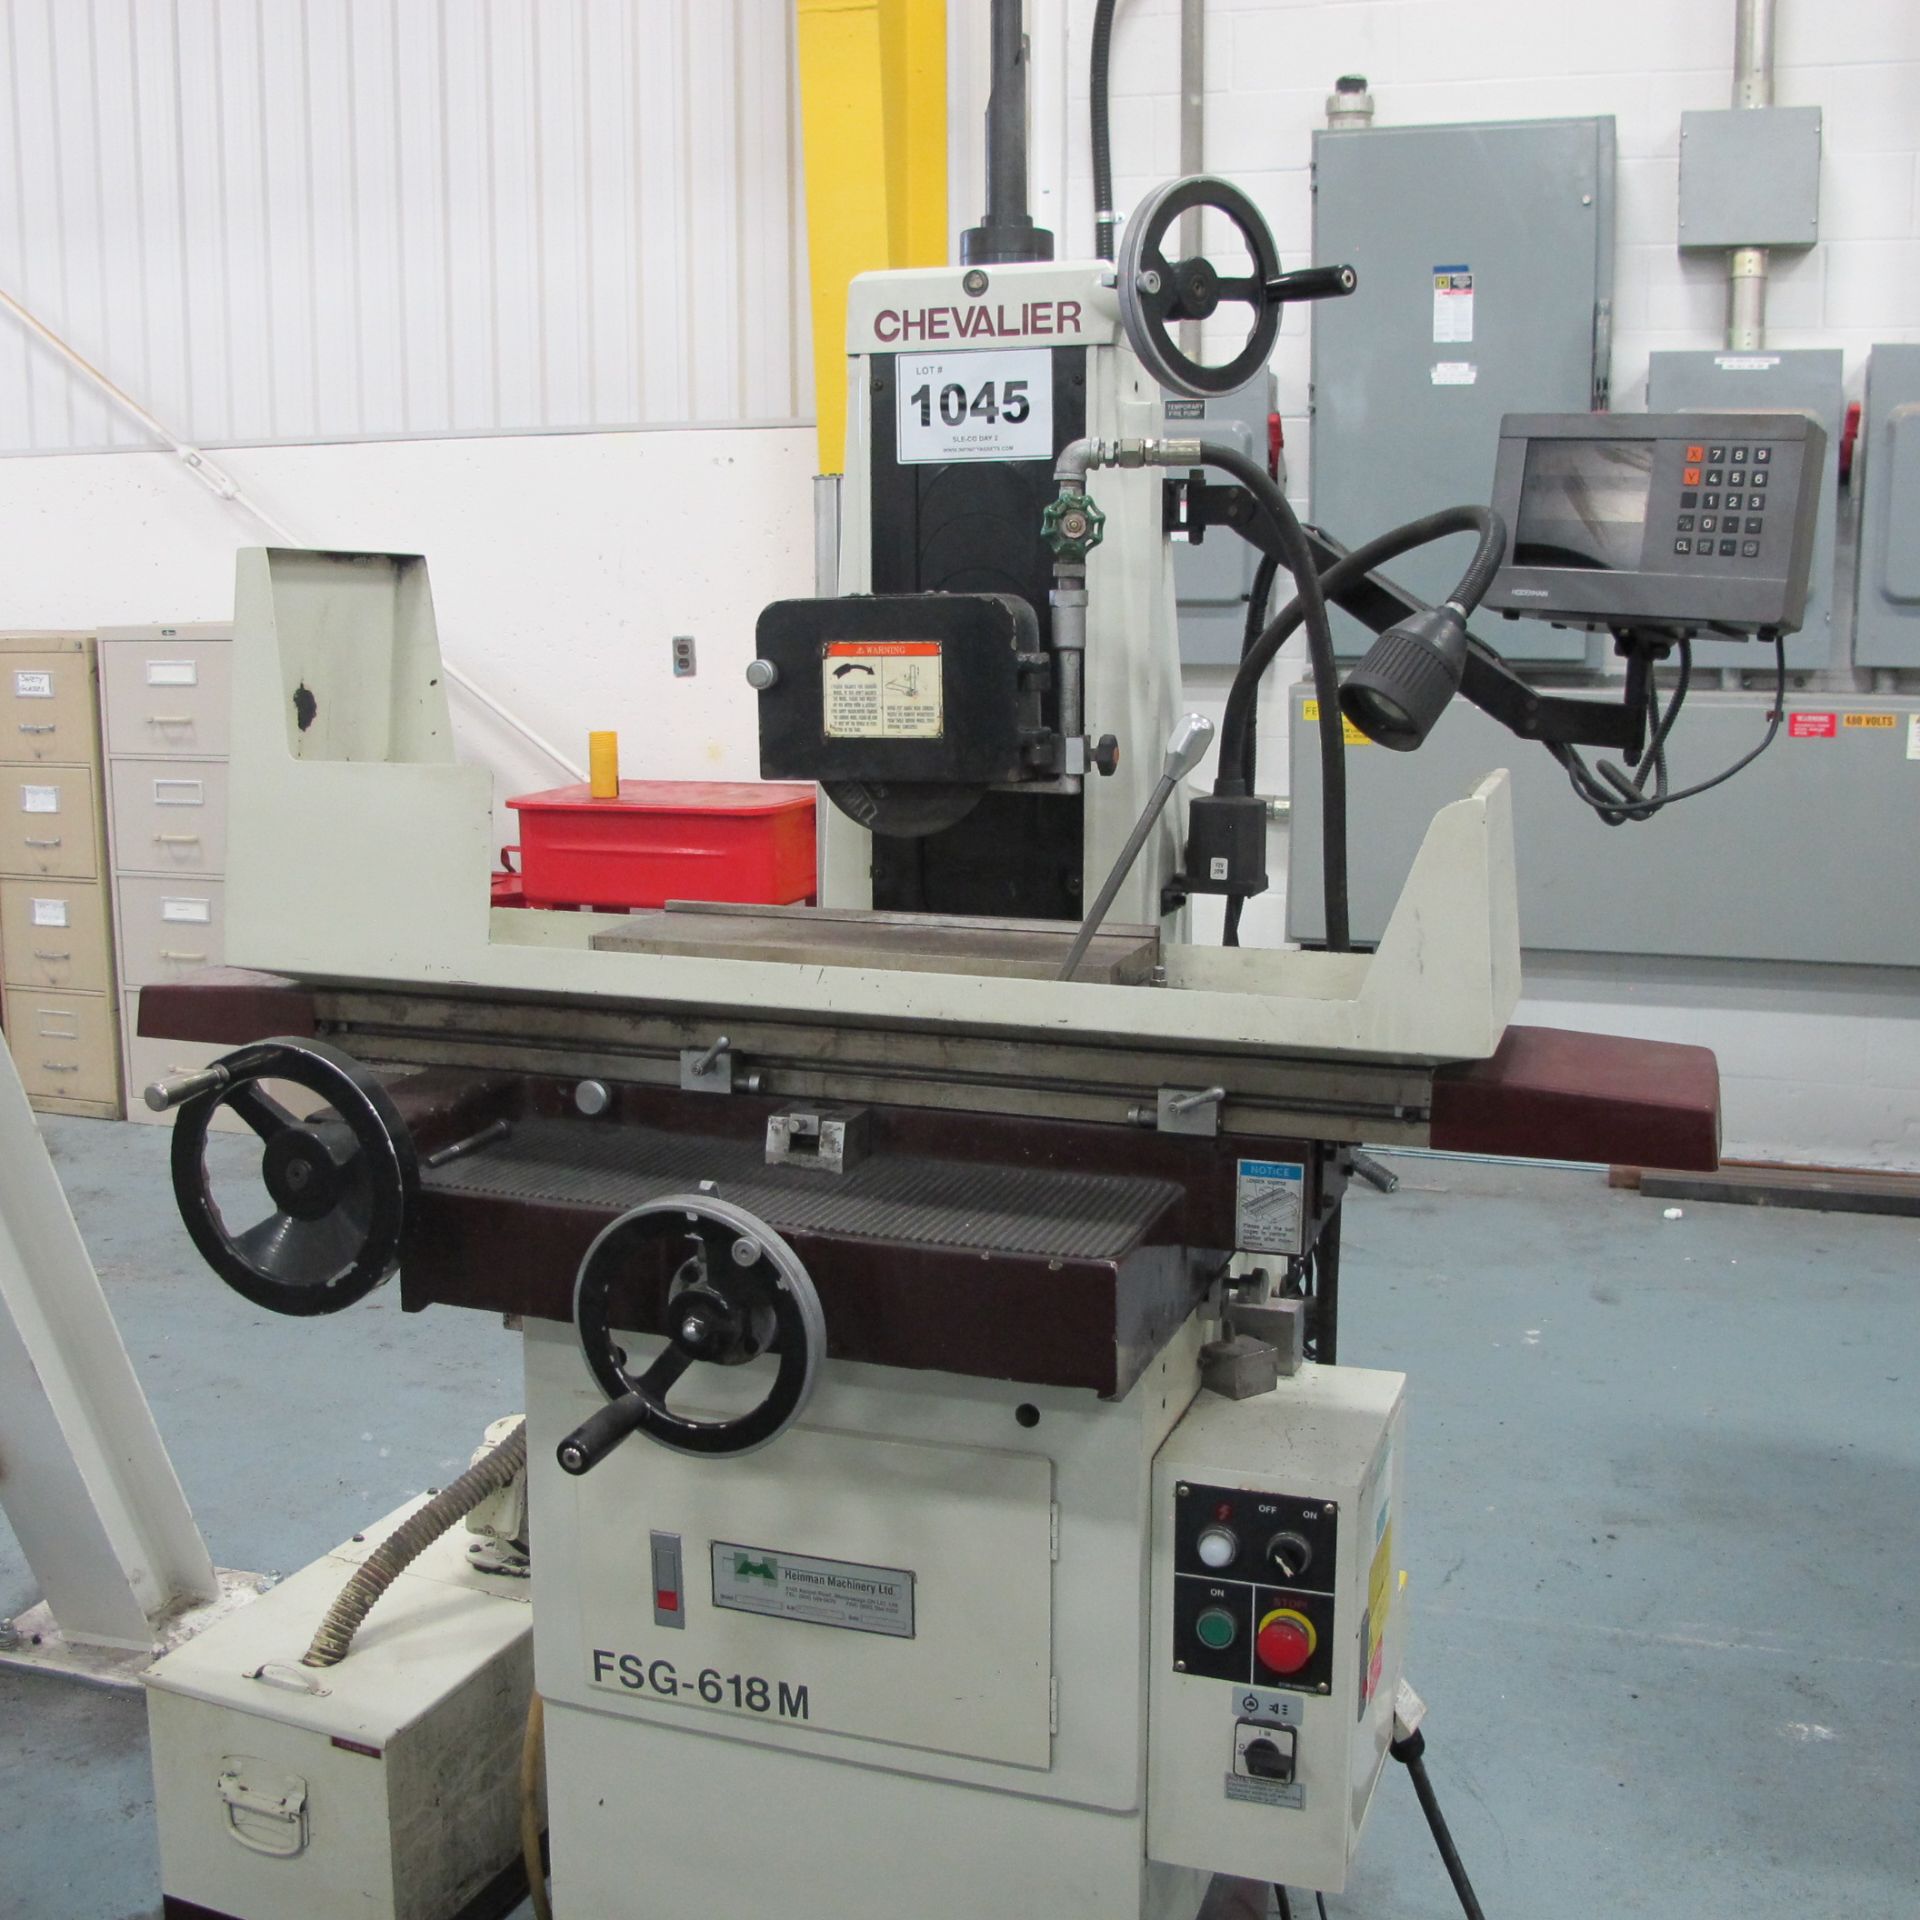 CHEVALIER FSG-618M MANUAL SURFACE GRINDER, HEIDENHAIN DRO S/N: A3937004, 6" X 18" MAGNETIC CHUCK - Image 5 of 5